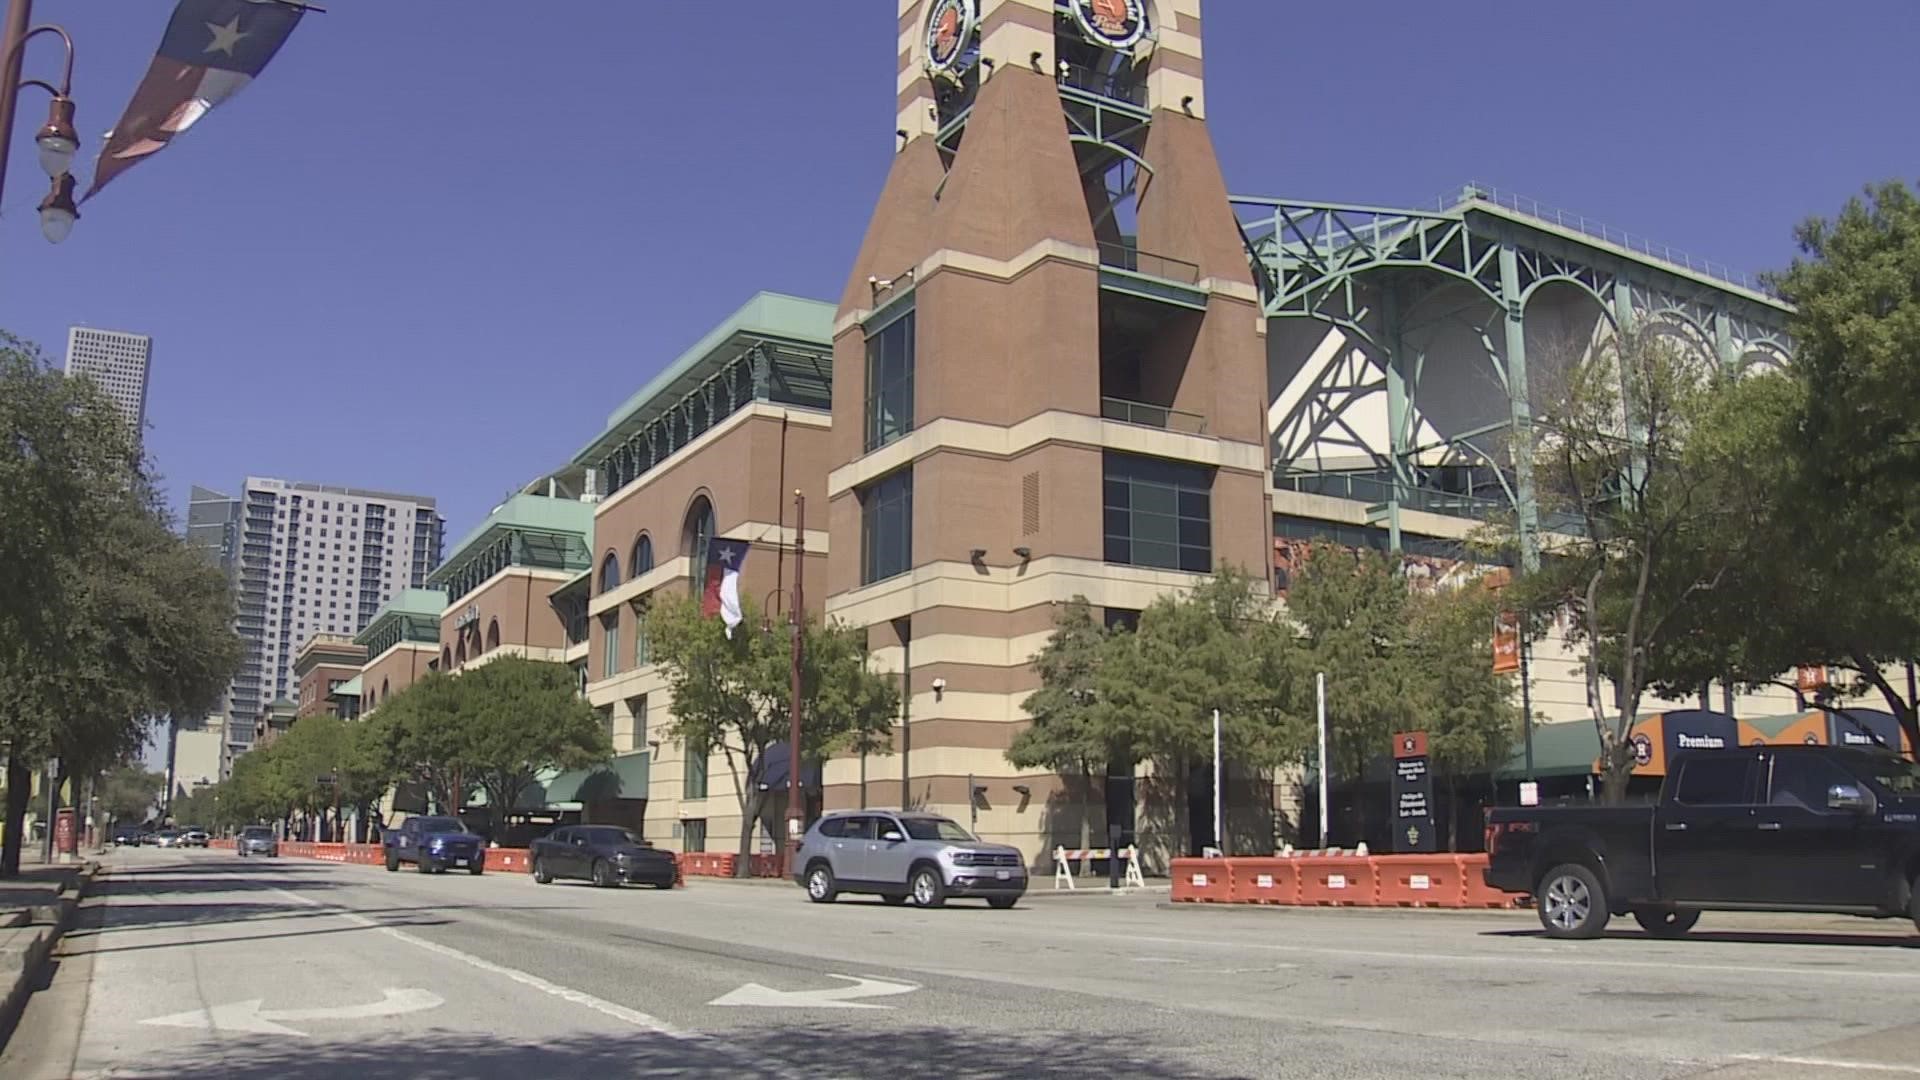 Minute Maid Park in Downtown Houston - Tours and Activities